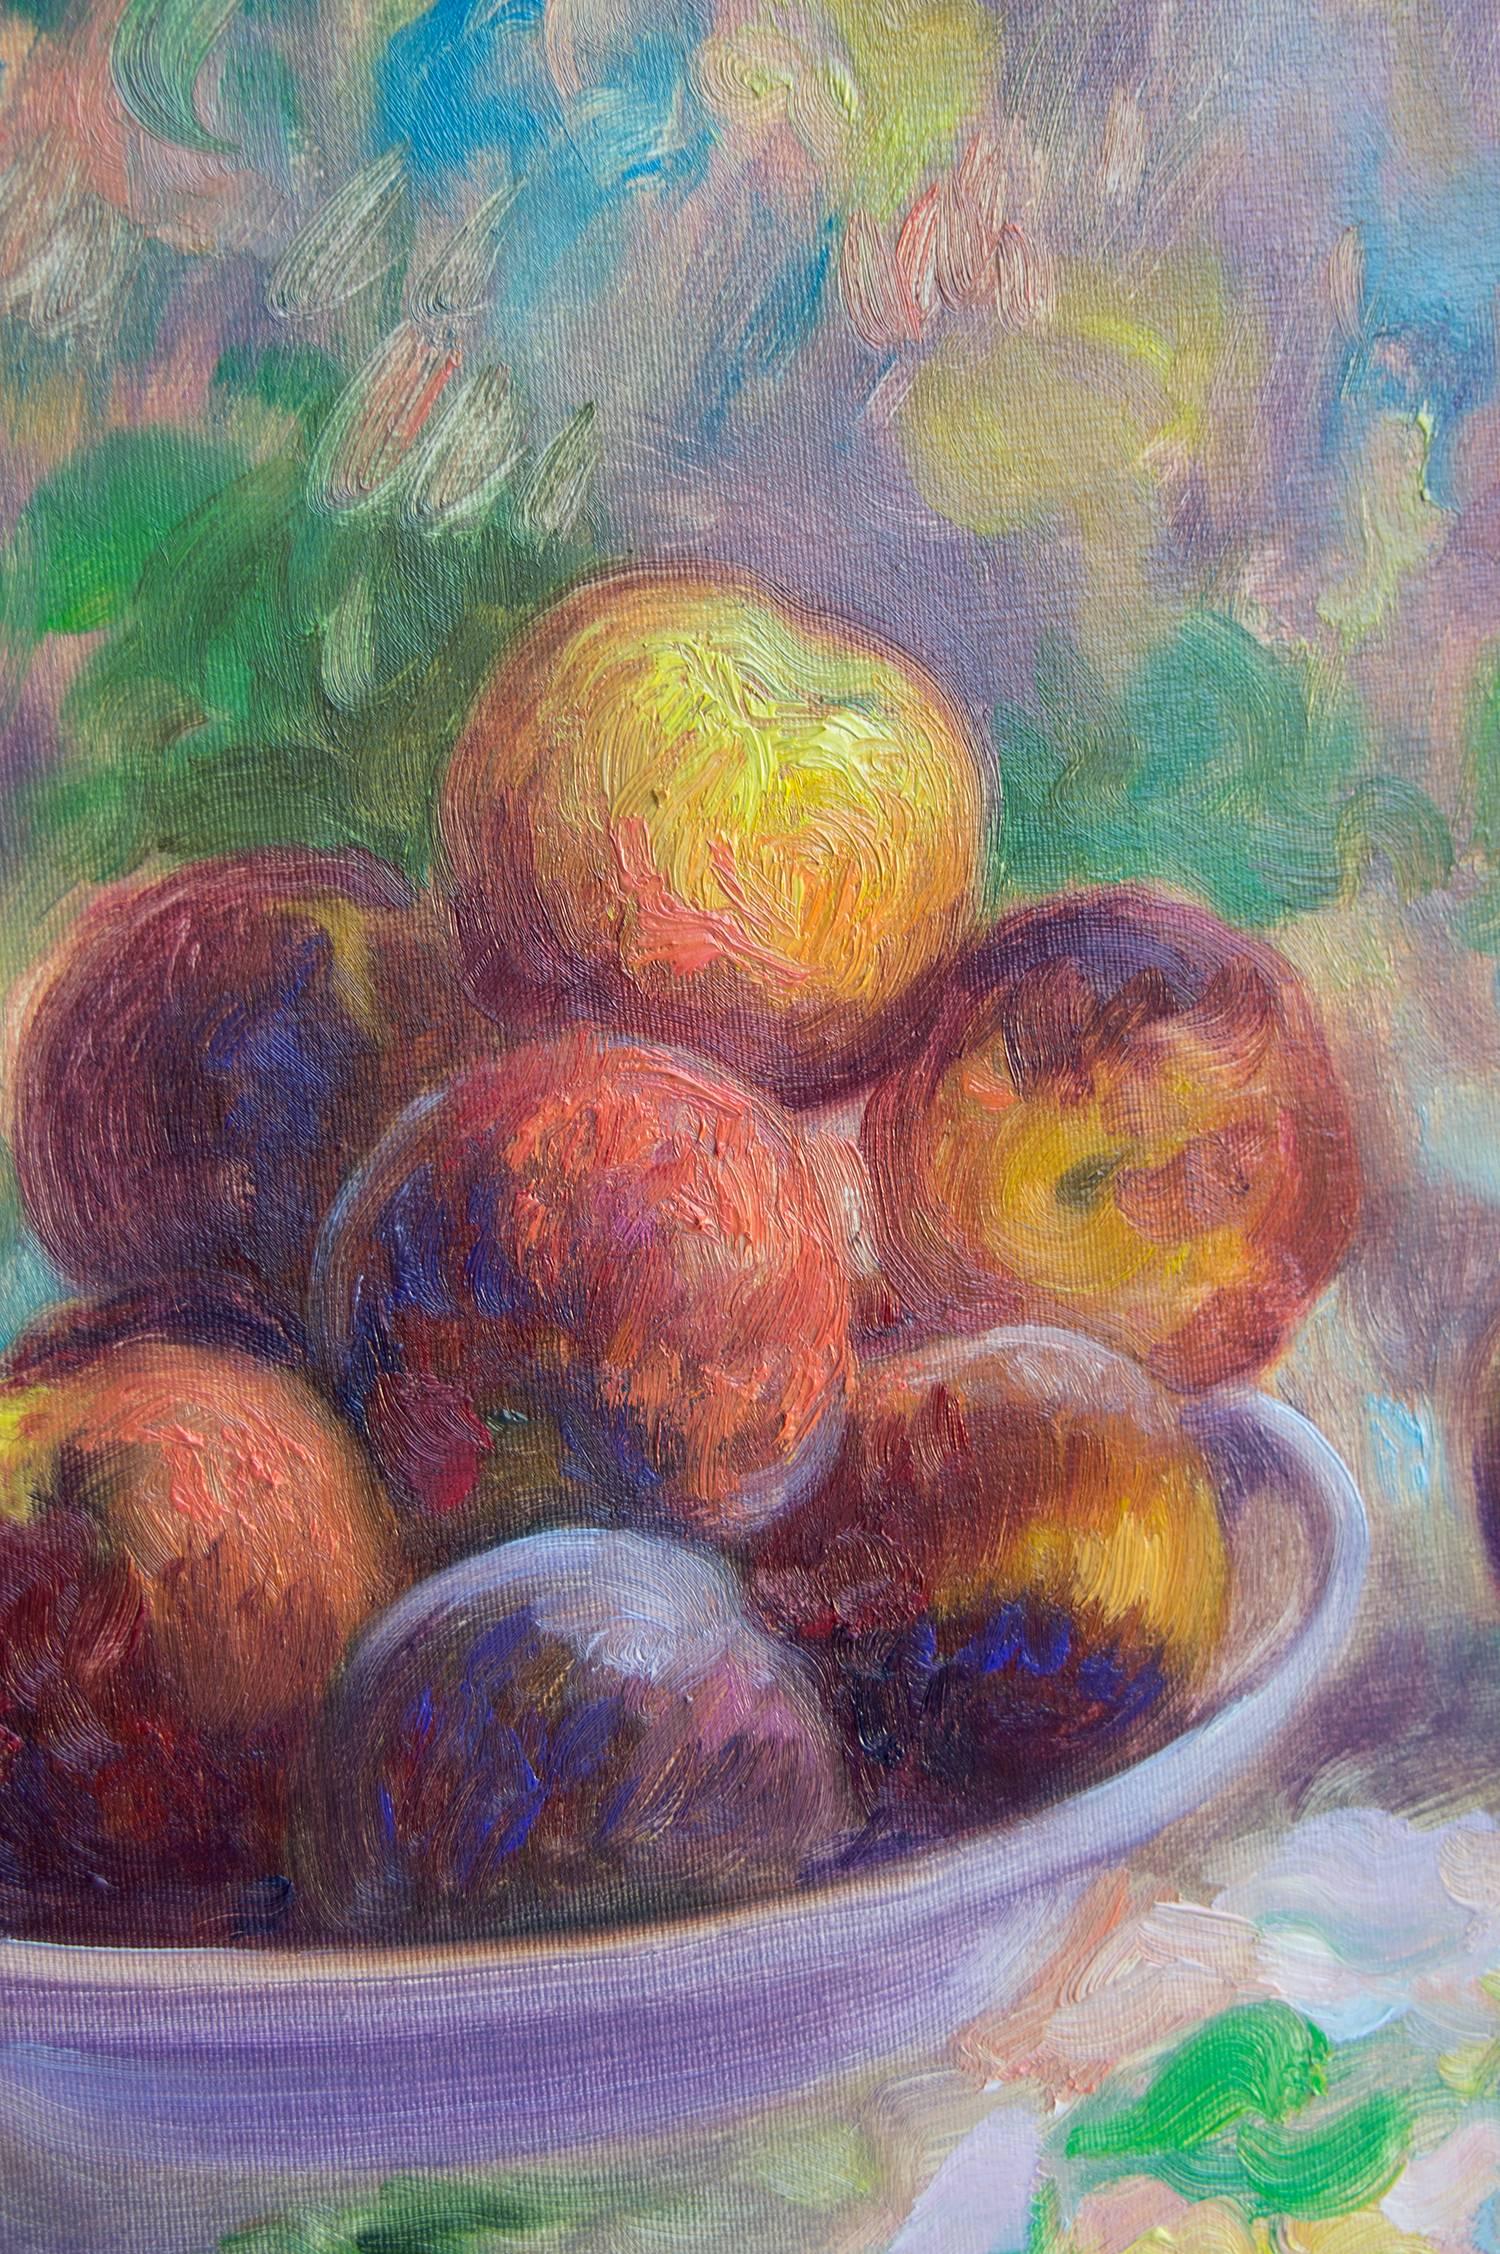 Title: Still Life with Peaches
Artist: Elina Arbidane (emerging contemporary impressionism painter), Latvia
Original Alla Prima hand-painted oil on canvas still life with peaches
Not a print or copy, only one available
Measure: 40 cm x 30 cm (